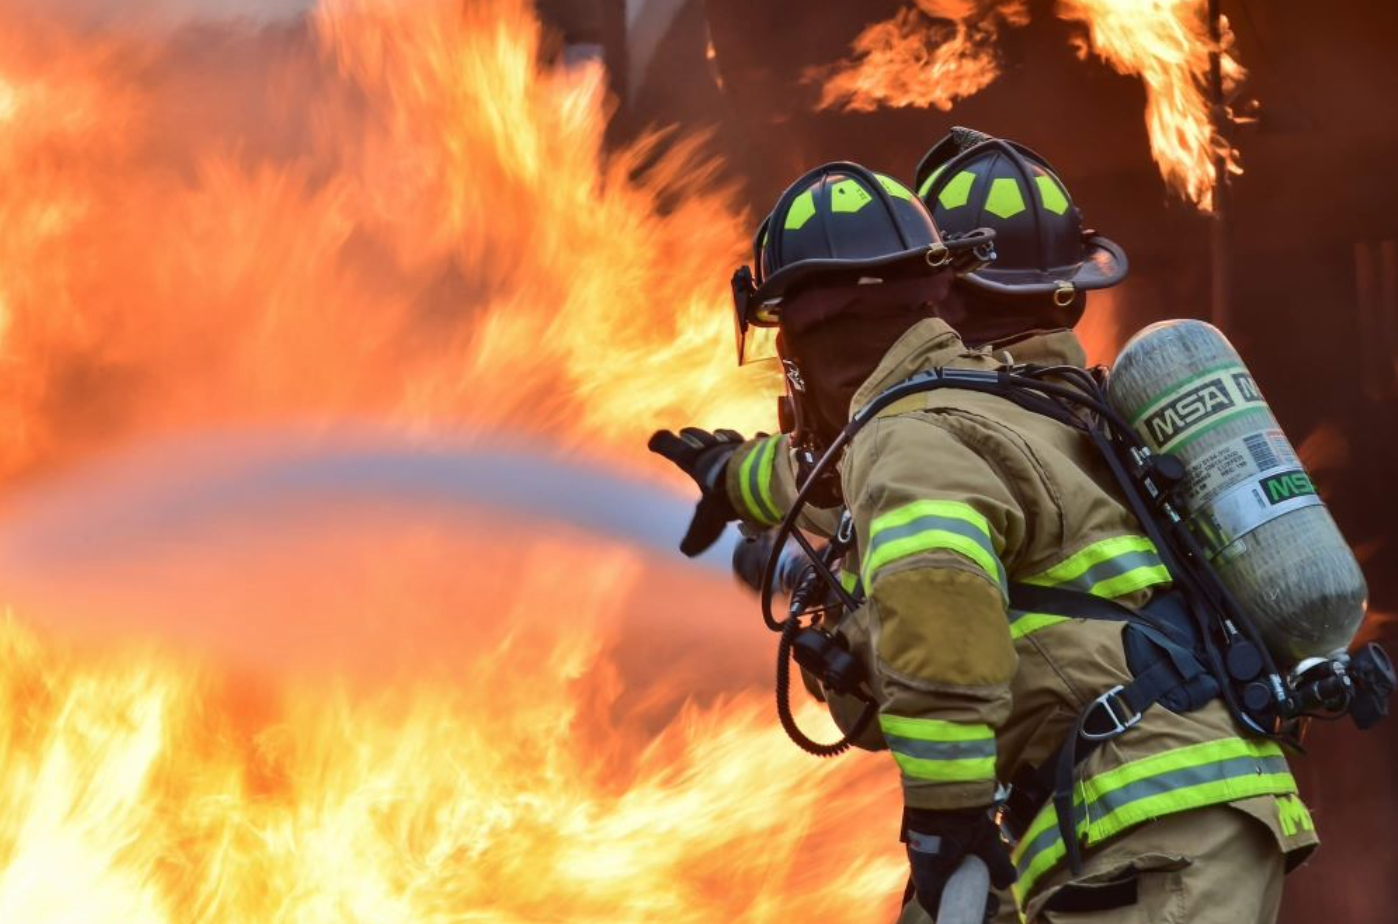 Firefighters fighting a fire; image by Pixabay, via Pexels.com.